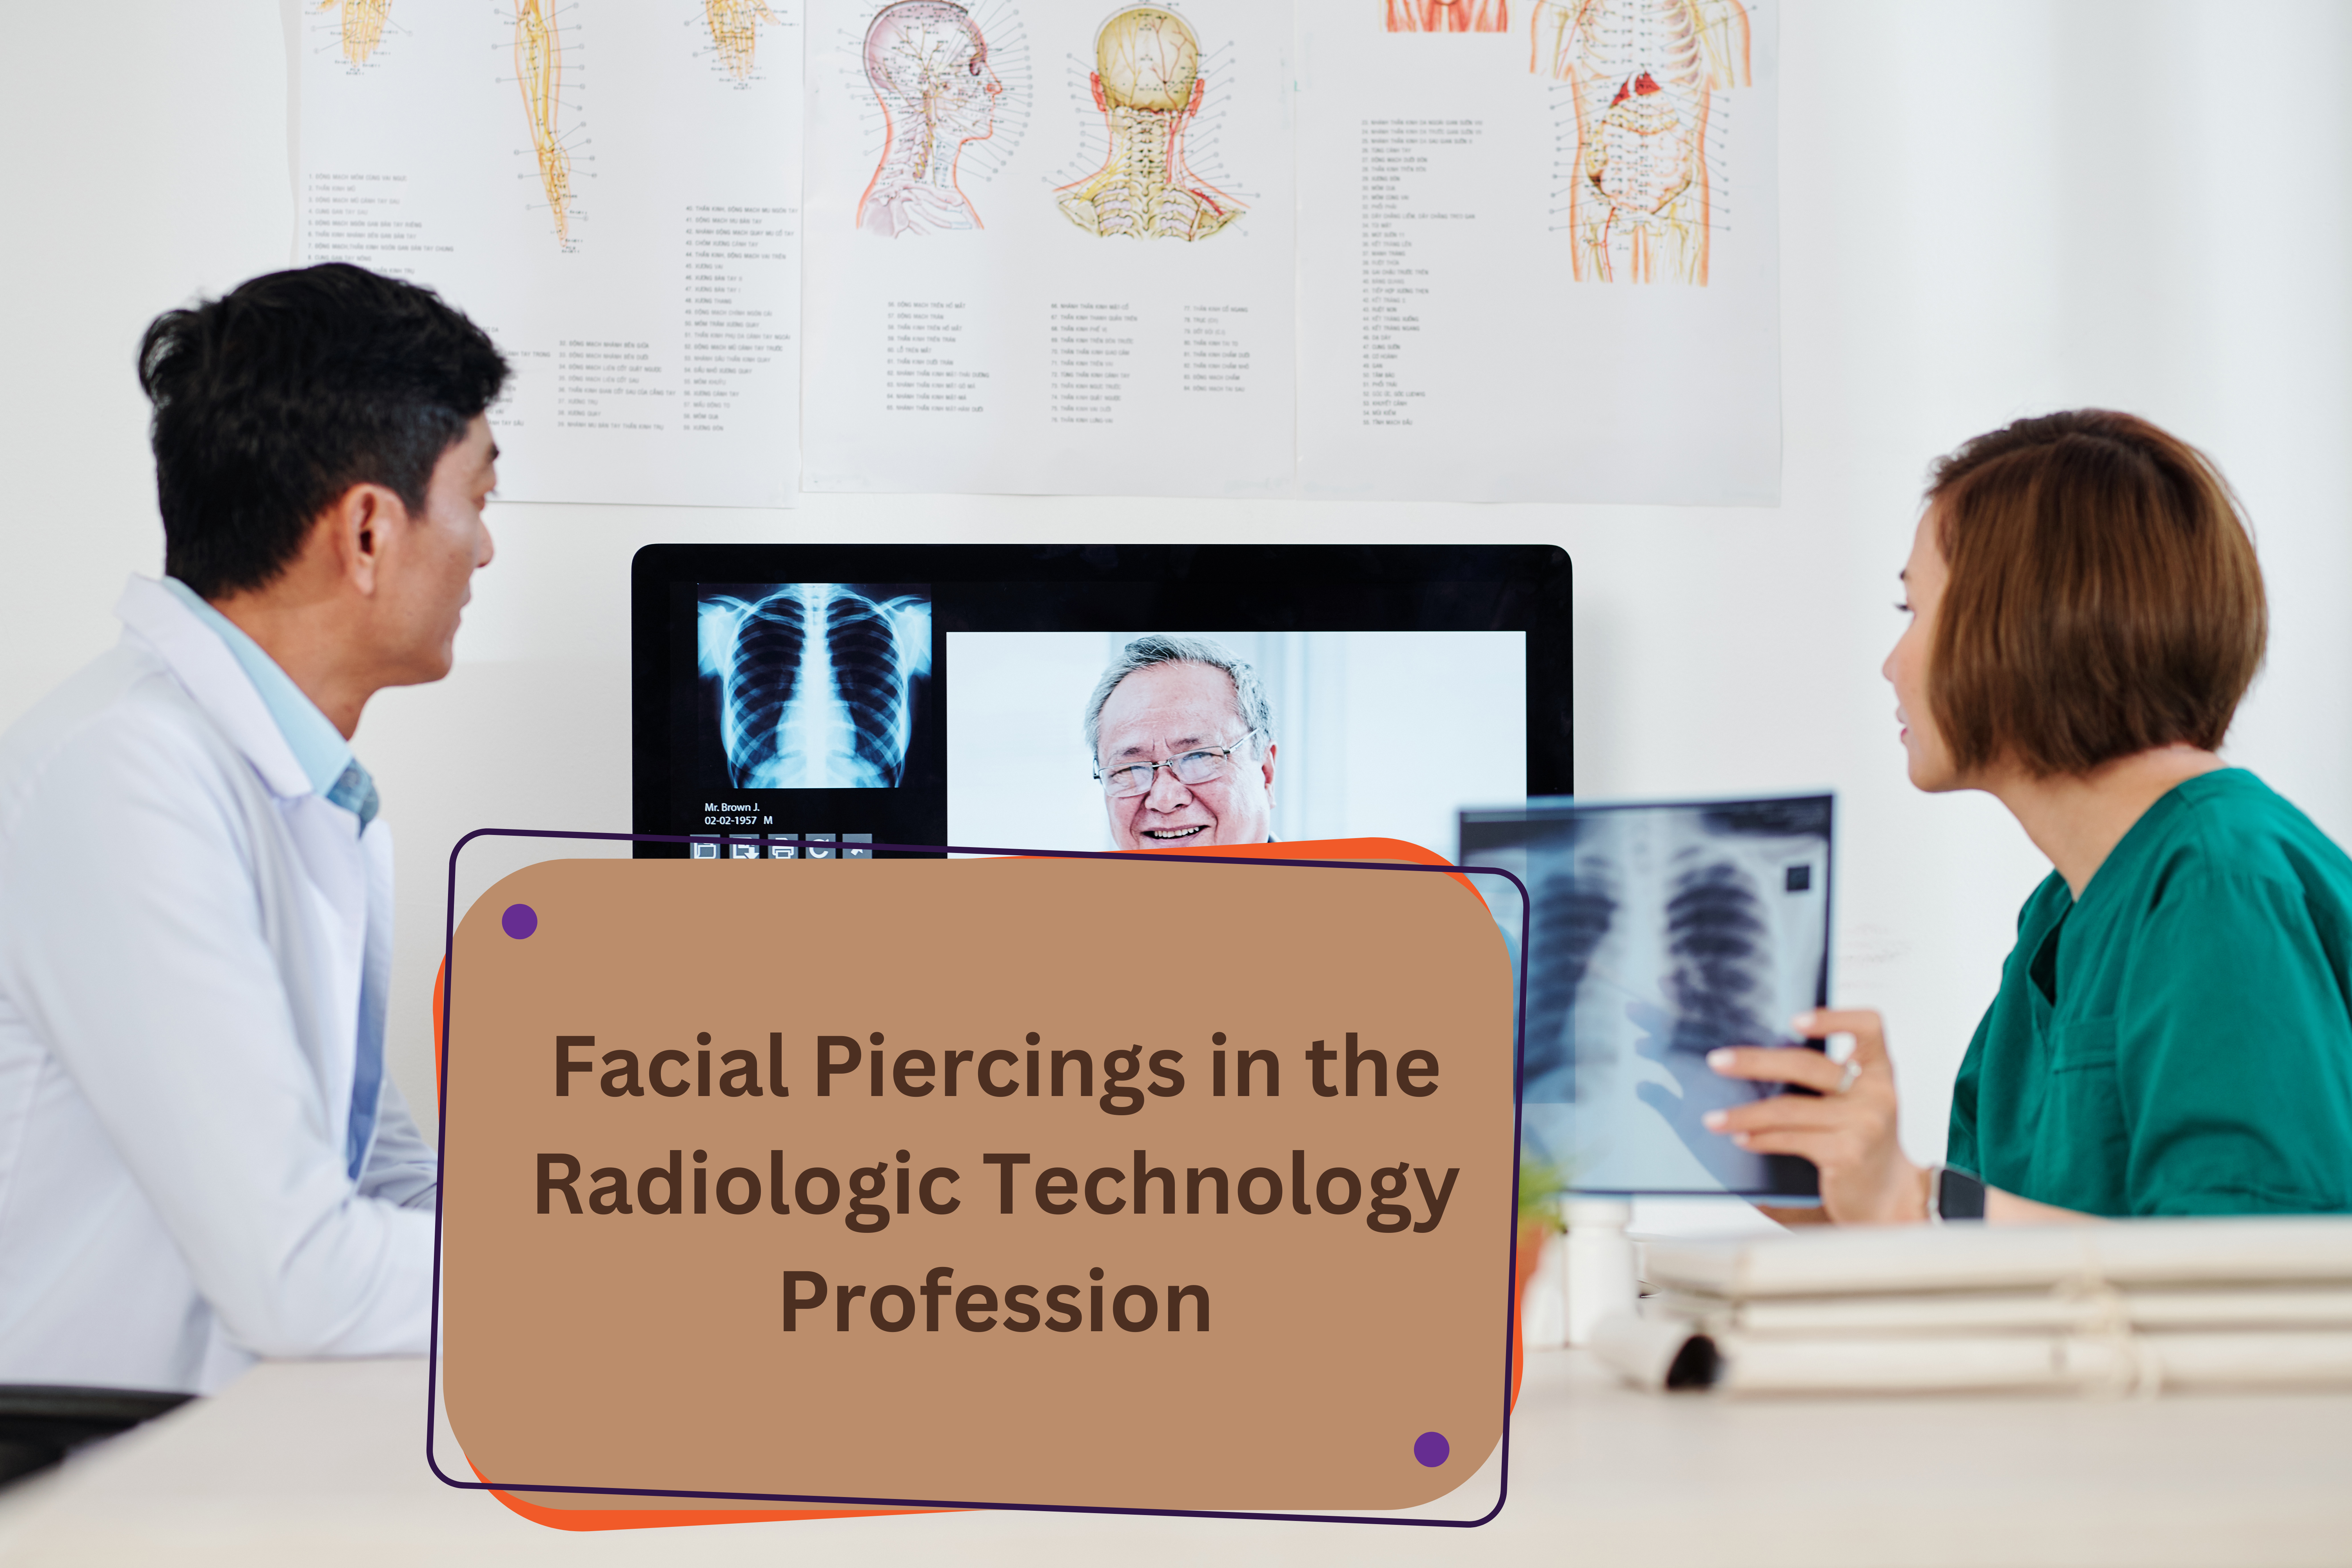 https://theradiologictechnologist.com/radiology-career-guide-understanding-tattoo-policies-for-aspiring-technologists/